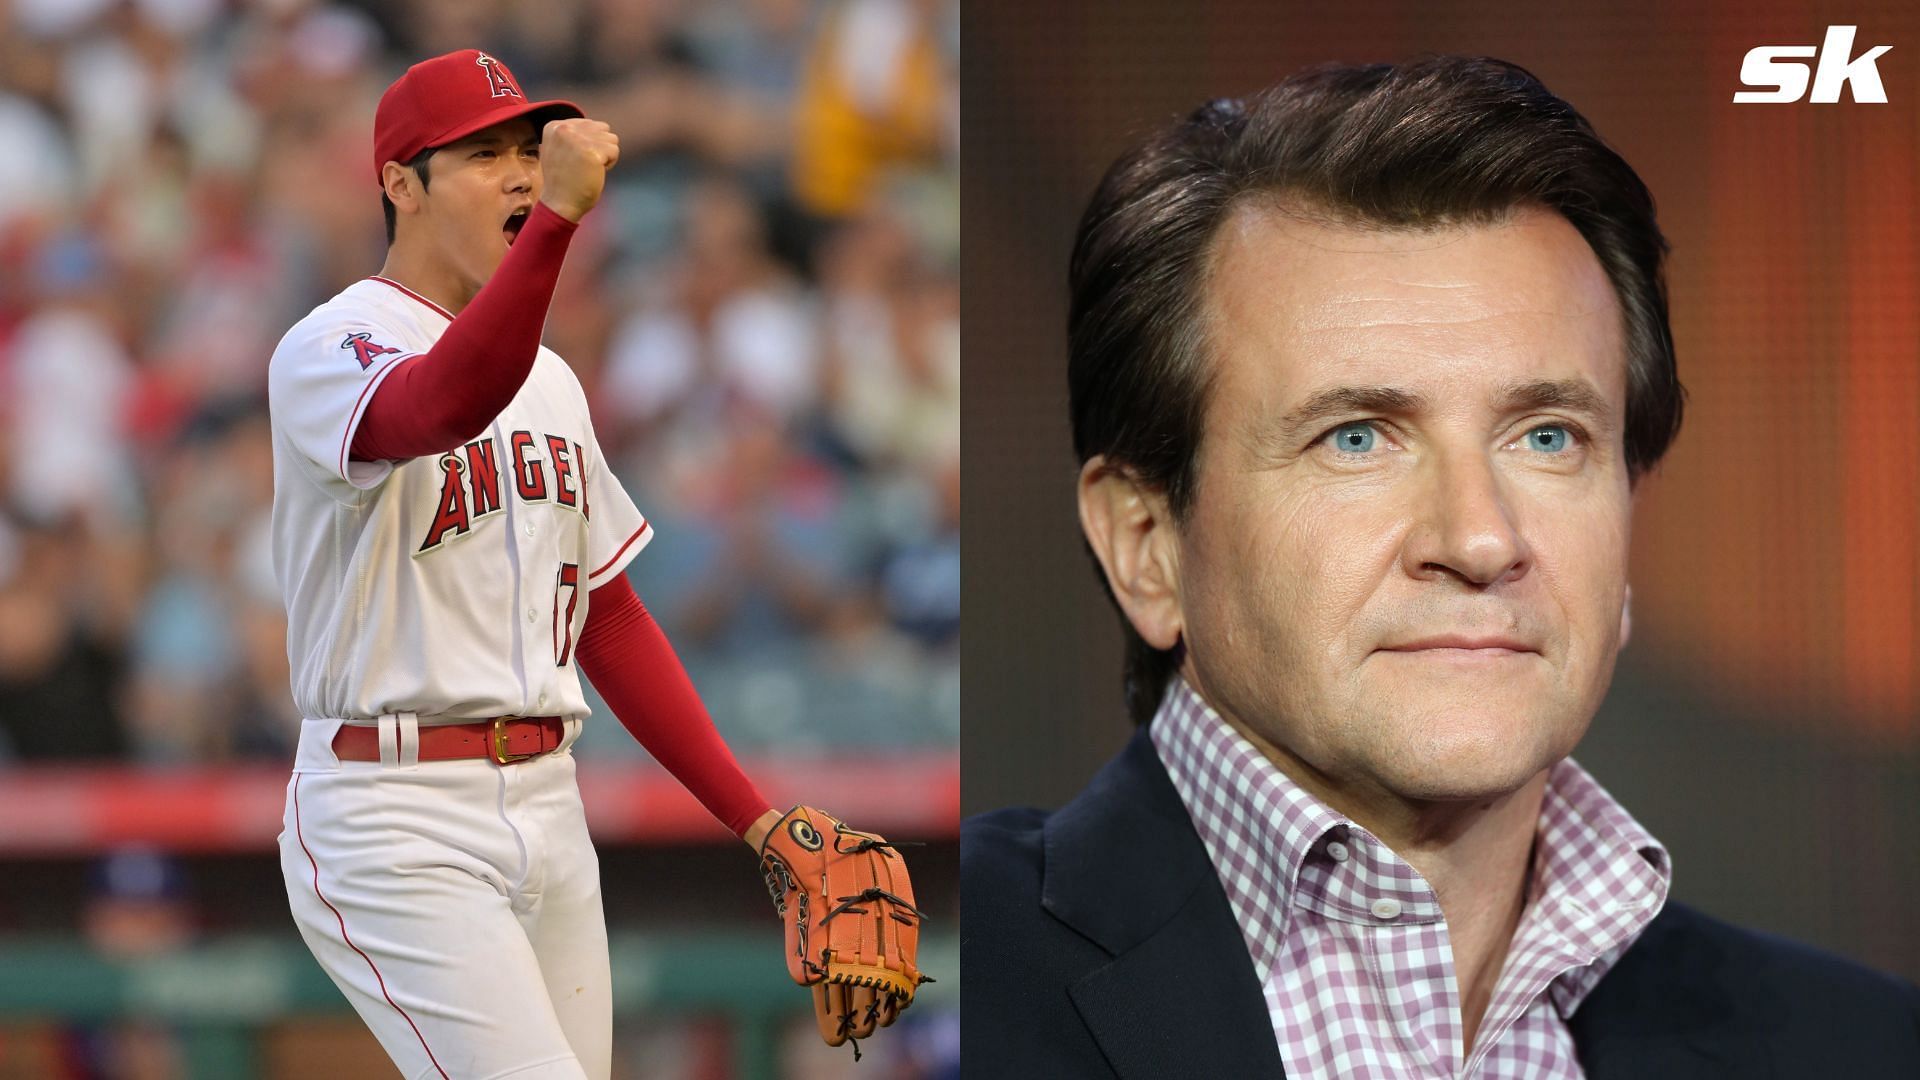 Robert Herjavec posts a picture after his plane was misidentified as Shohei Ohtani&rsquo;s